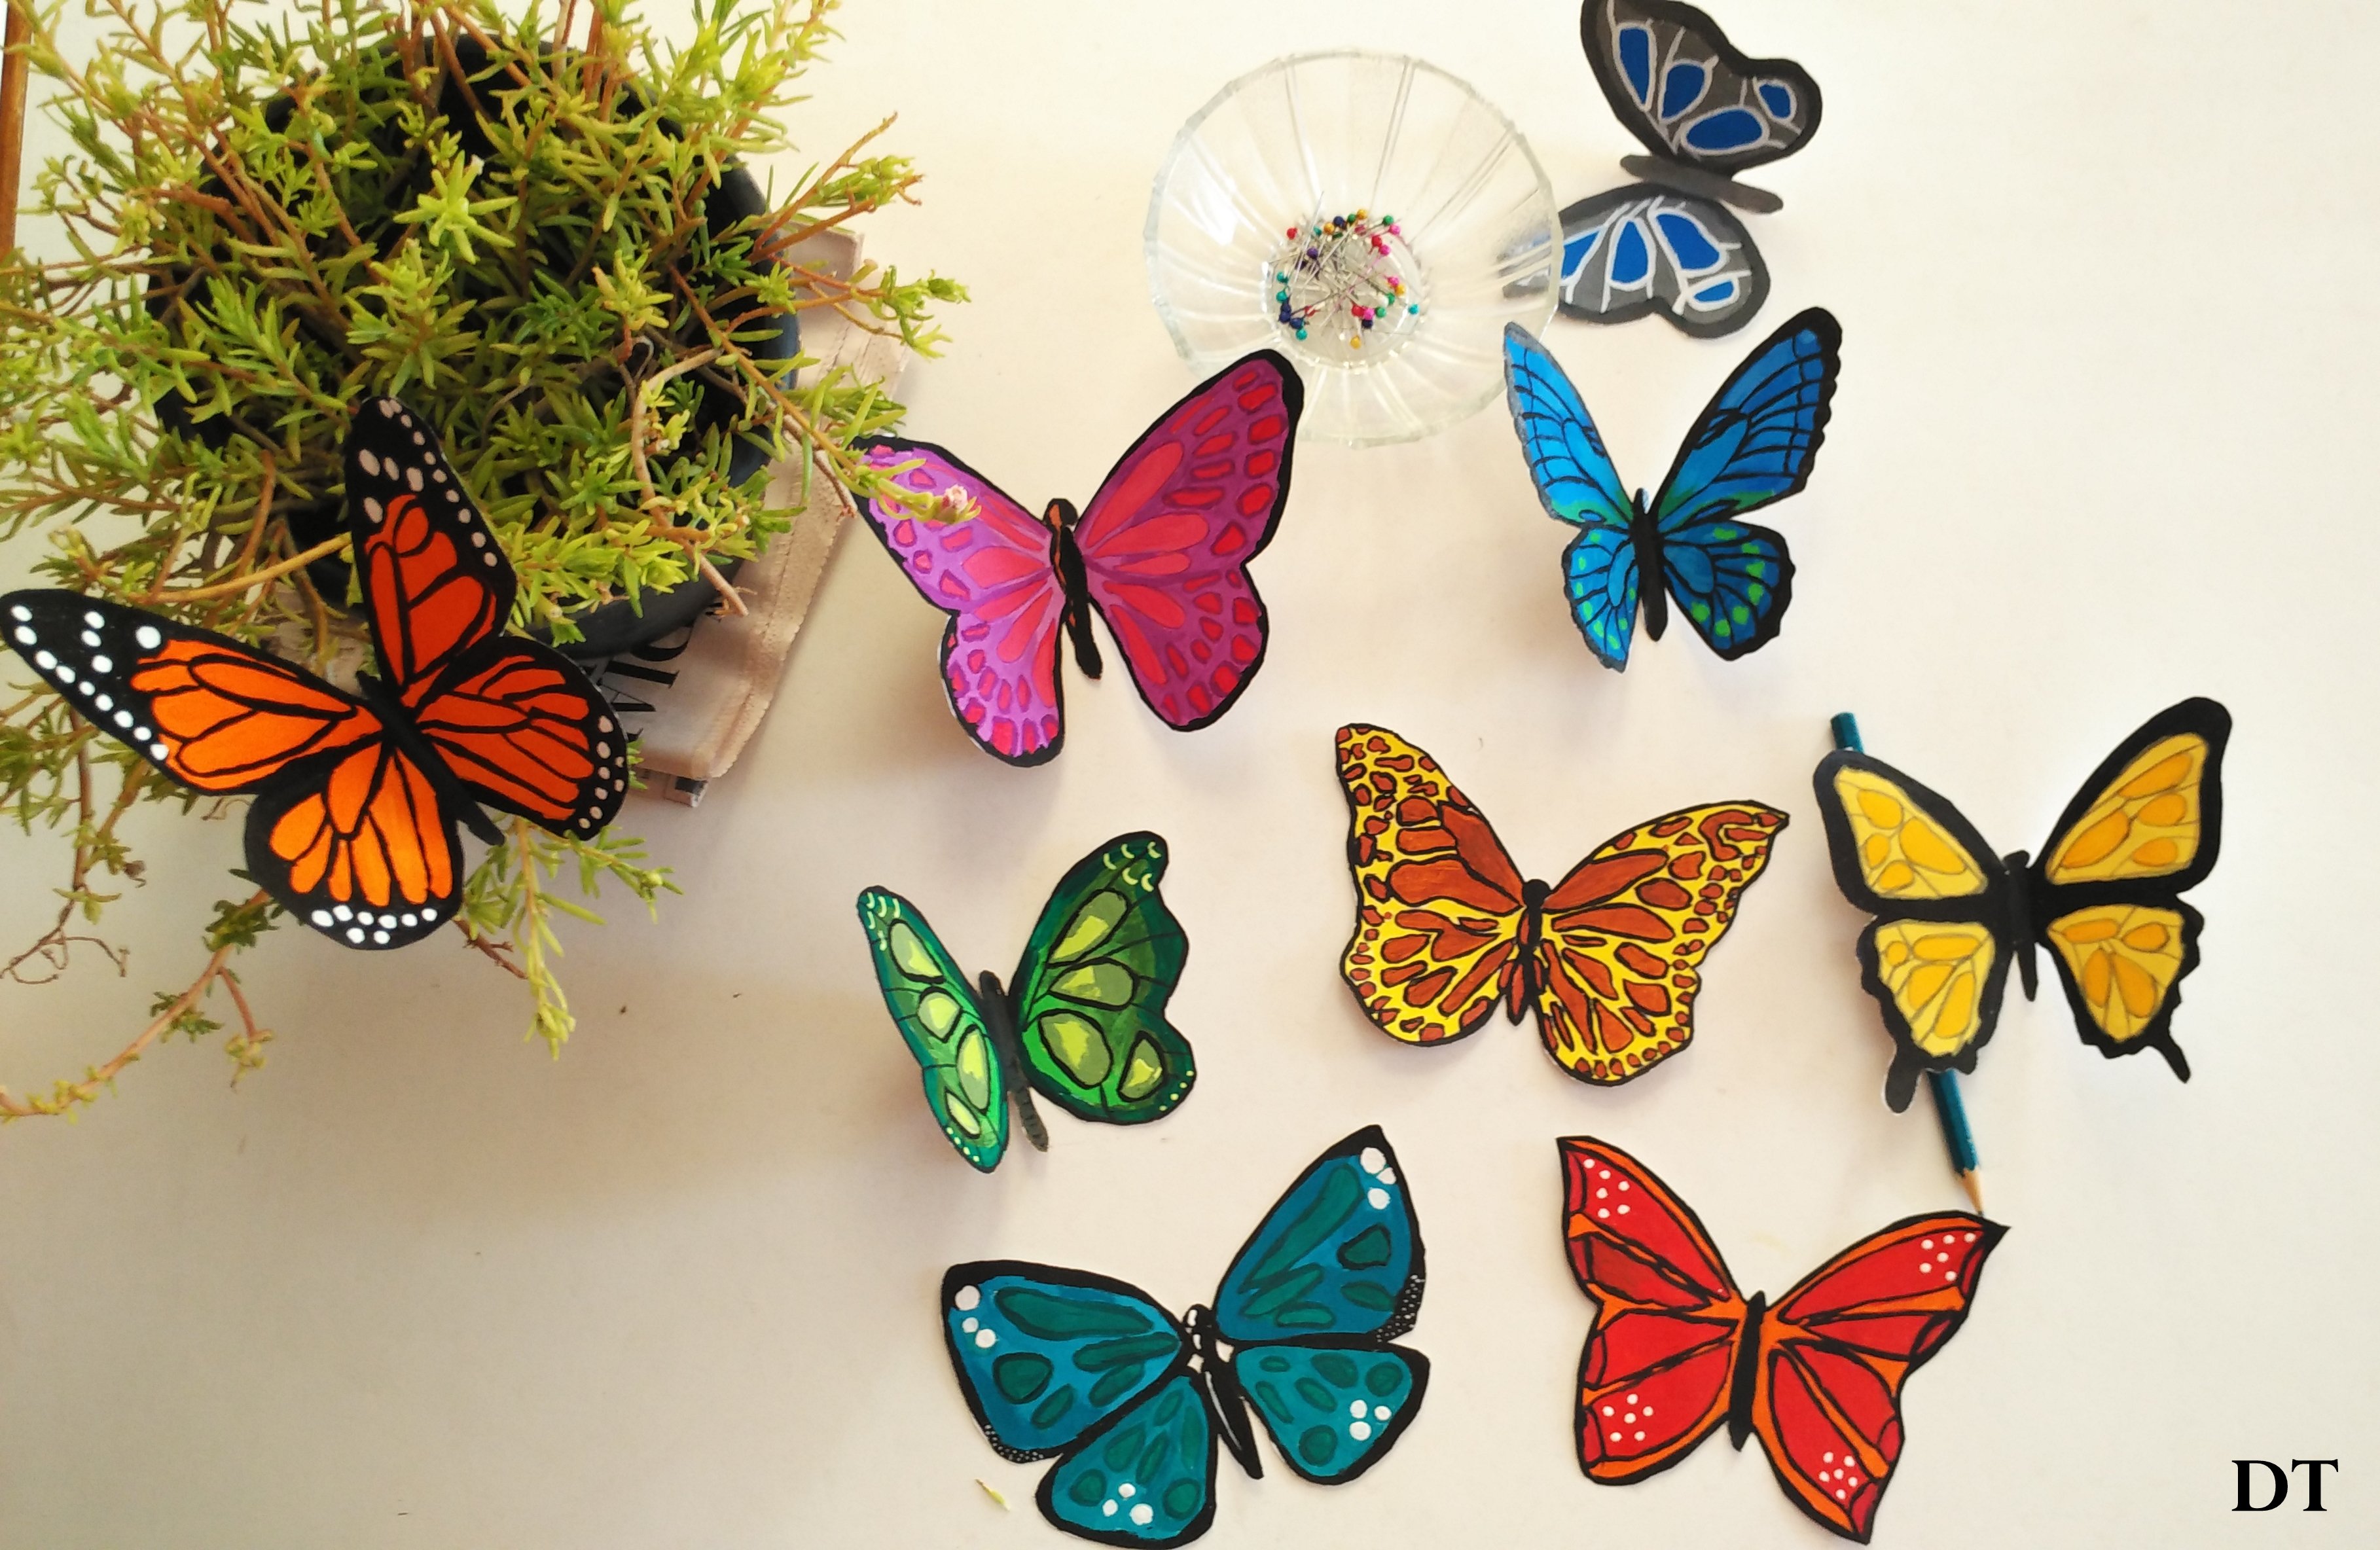 HOW TO MAKE BUTTERFLY? – PART 2